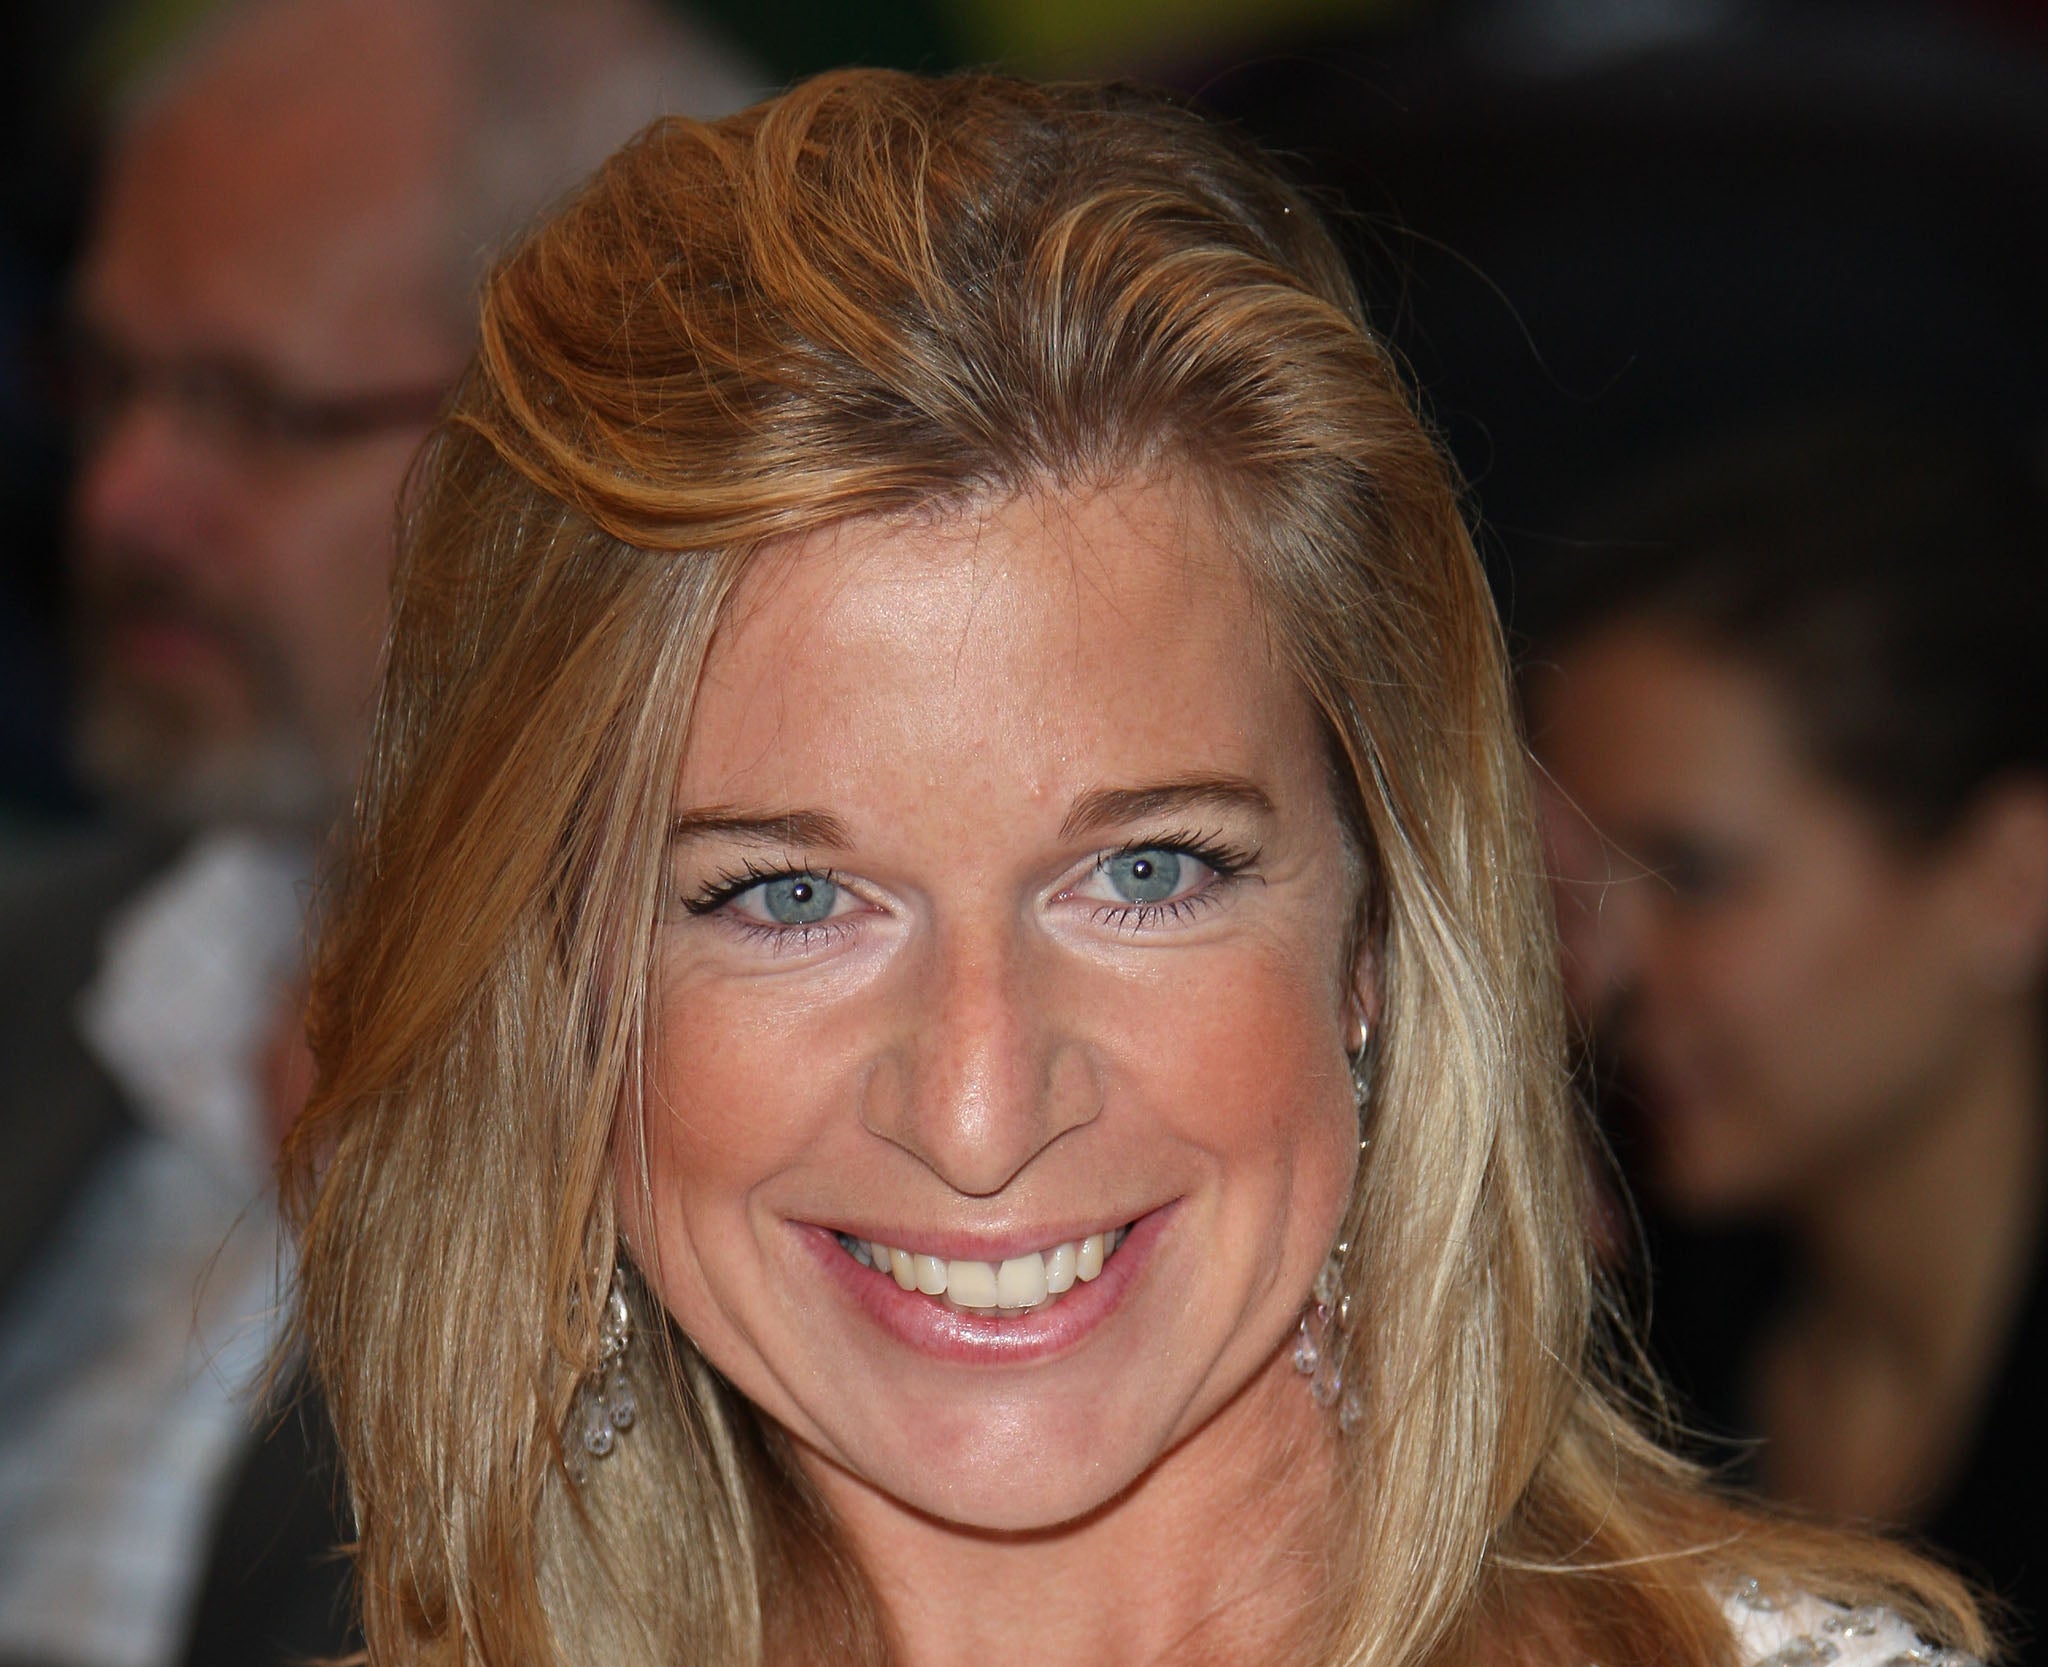 Hundreds of thousands of people have signed a petition to see Katie Hopkins sacked from The Sun